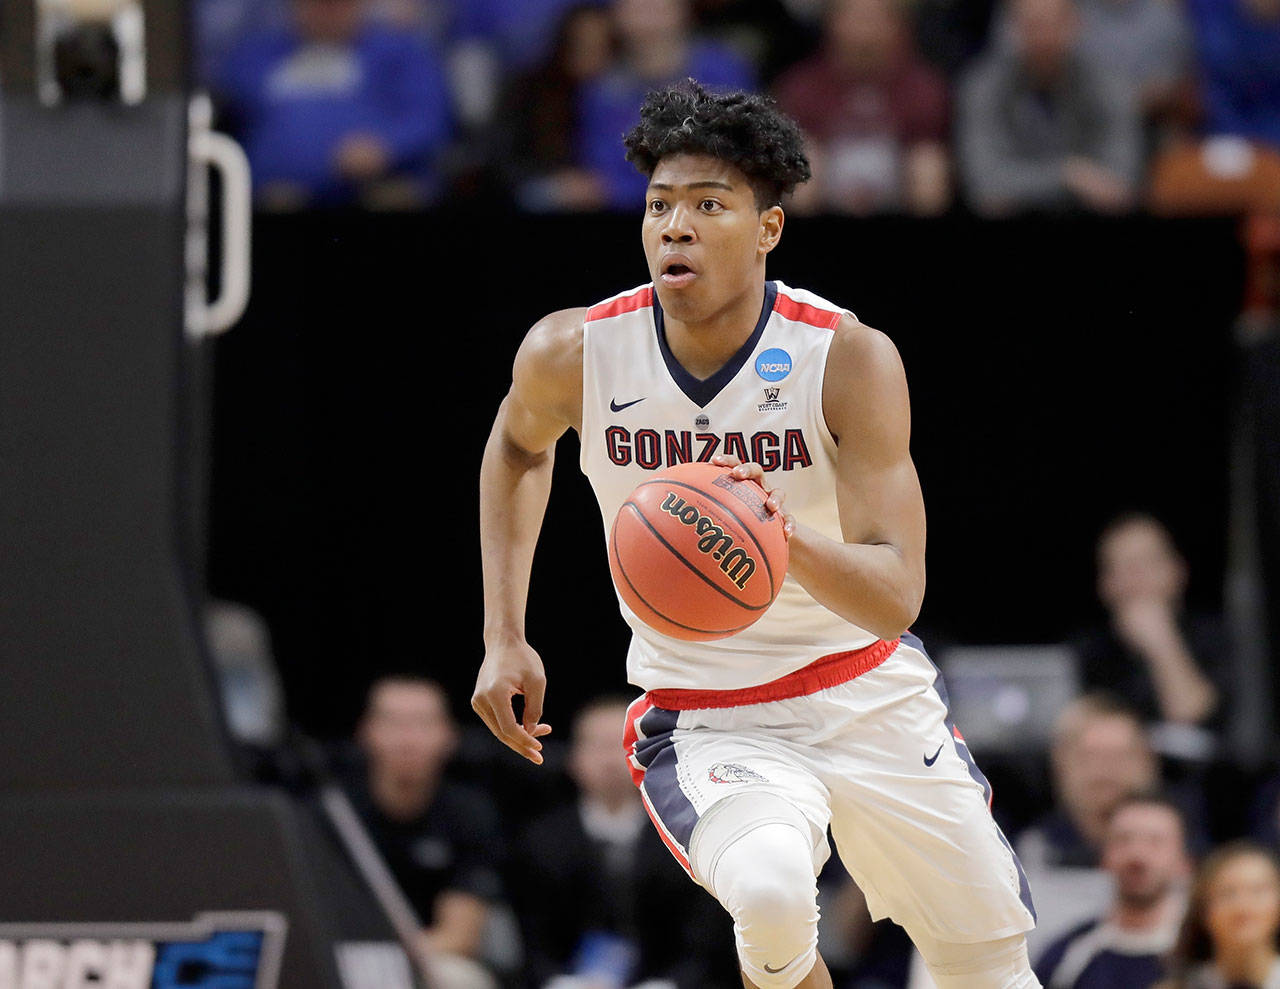 Gonzaga’s Rui Hachimura moves the ball during an NCAA Tournament first-round game against UNC-Greensboro on March 15 in Boise, Idaho. Hachimura is a huge part of what could be the Bulldogs’ best-ever team. (AP Photo/Ted S. Warren)